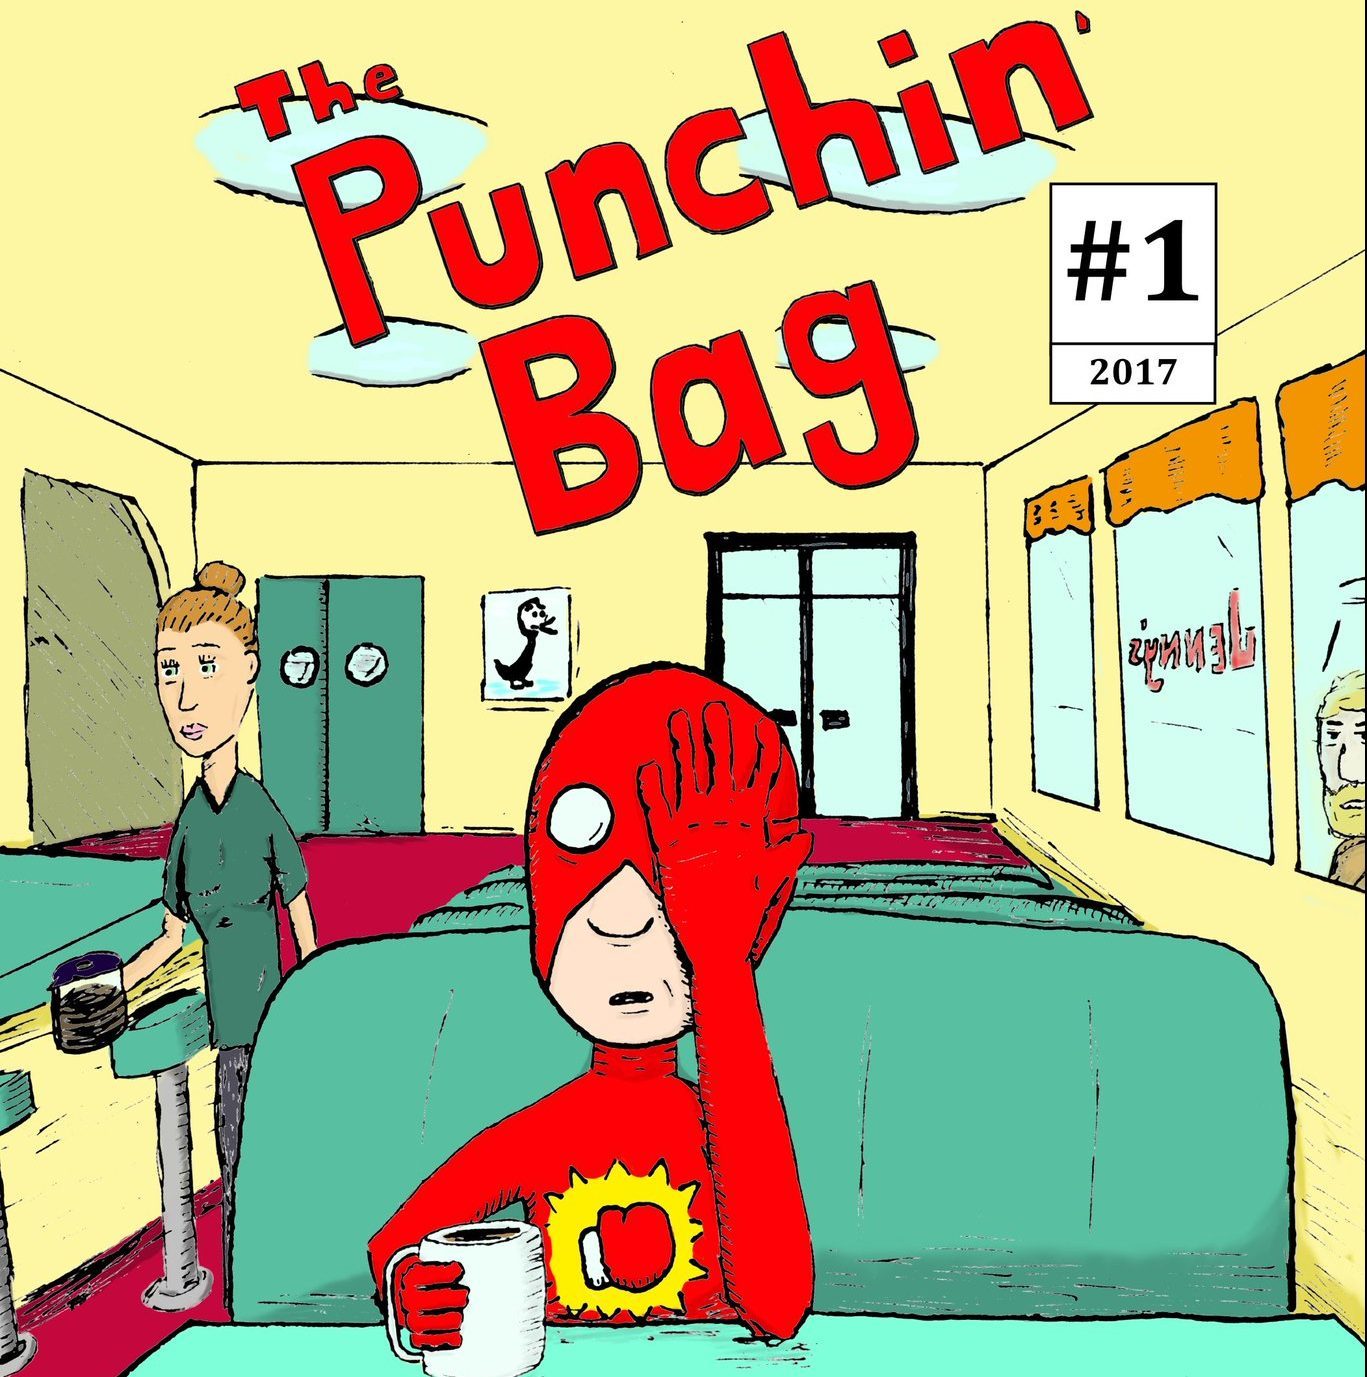 The Punchin’ Bag : Who are you James E Couture ?